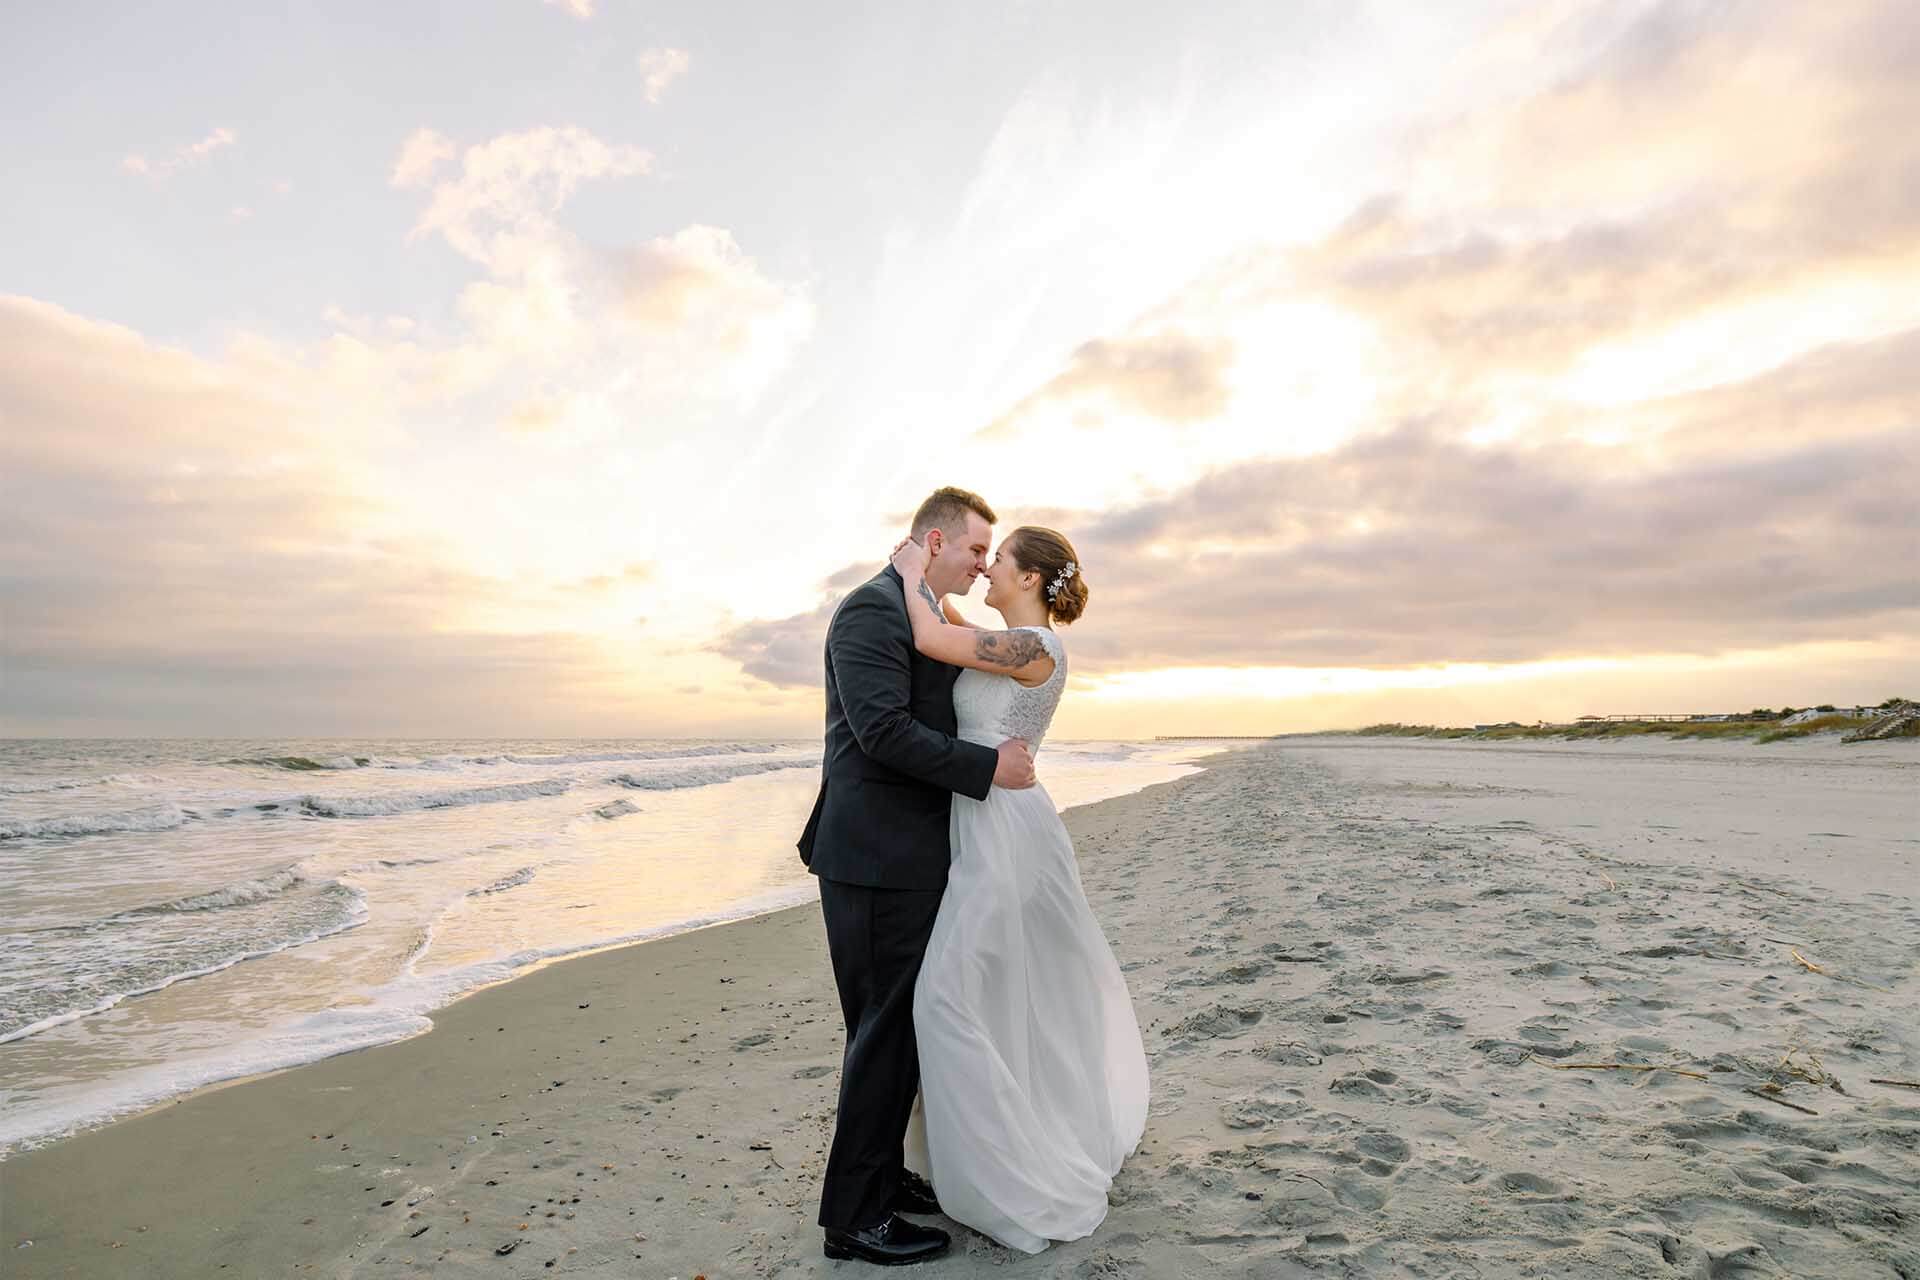 Lovely Elopement Couple at Isle of Palms Beach captured by Charleston Photo Art Photographers